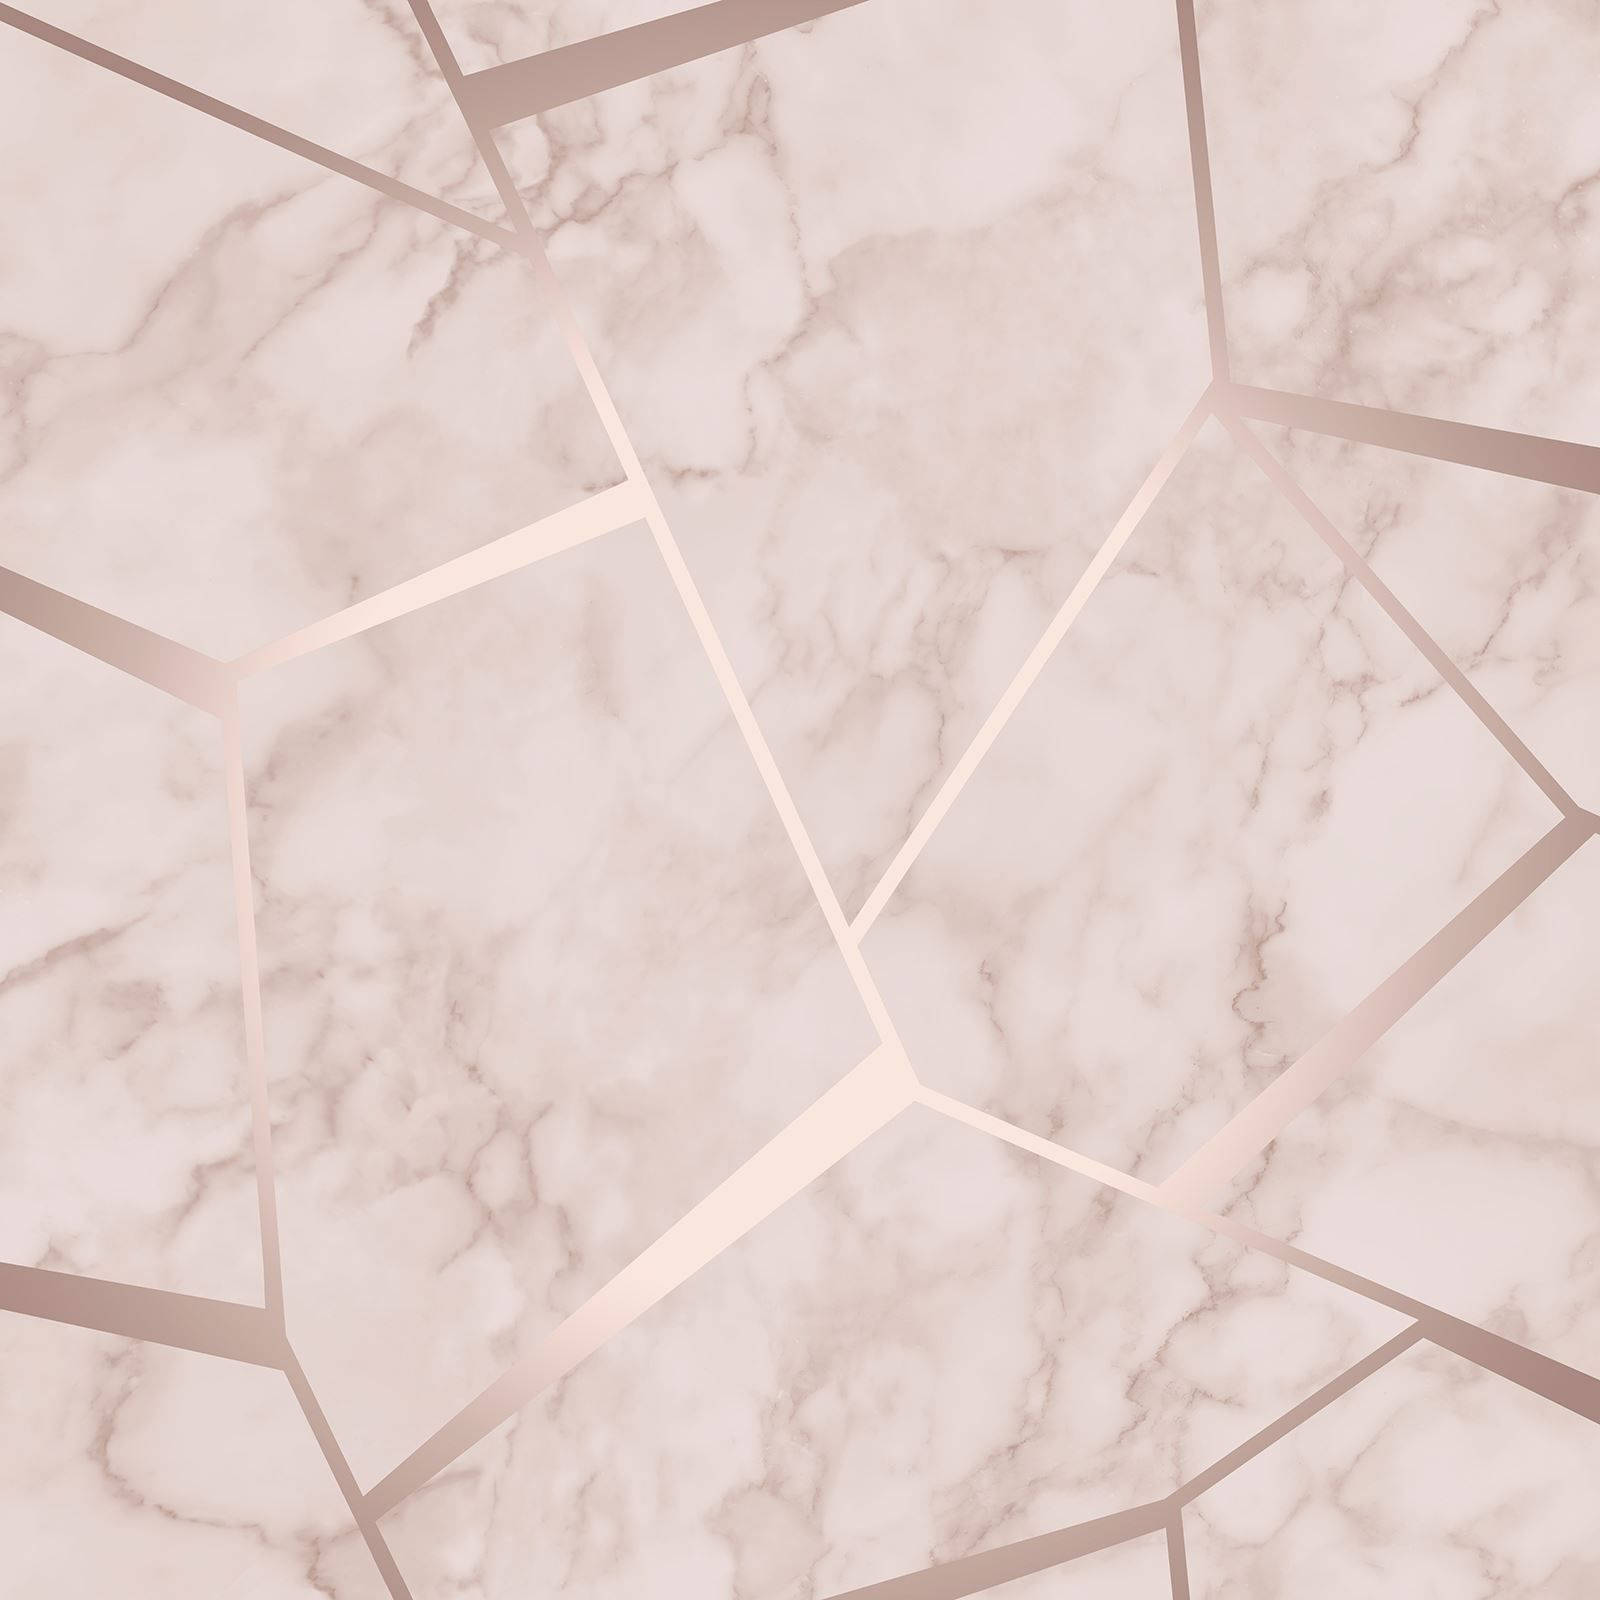 Caption: Exquisite Pink Marble With Geometric Lines